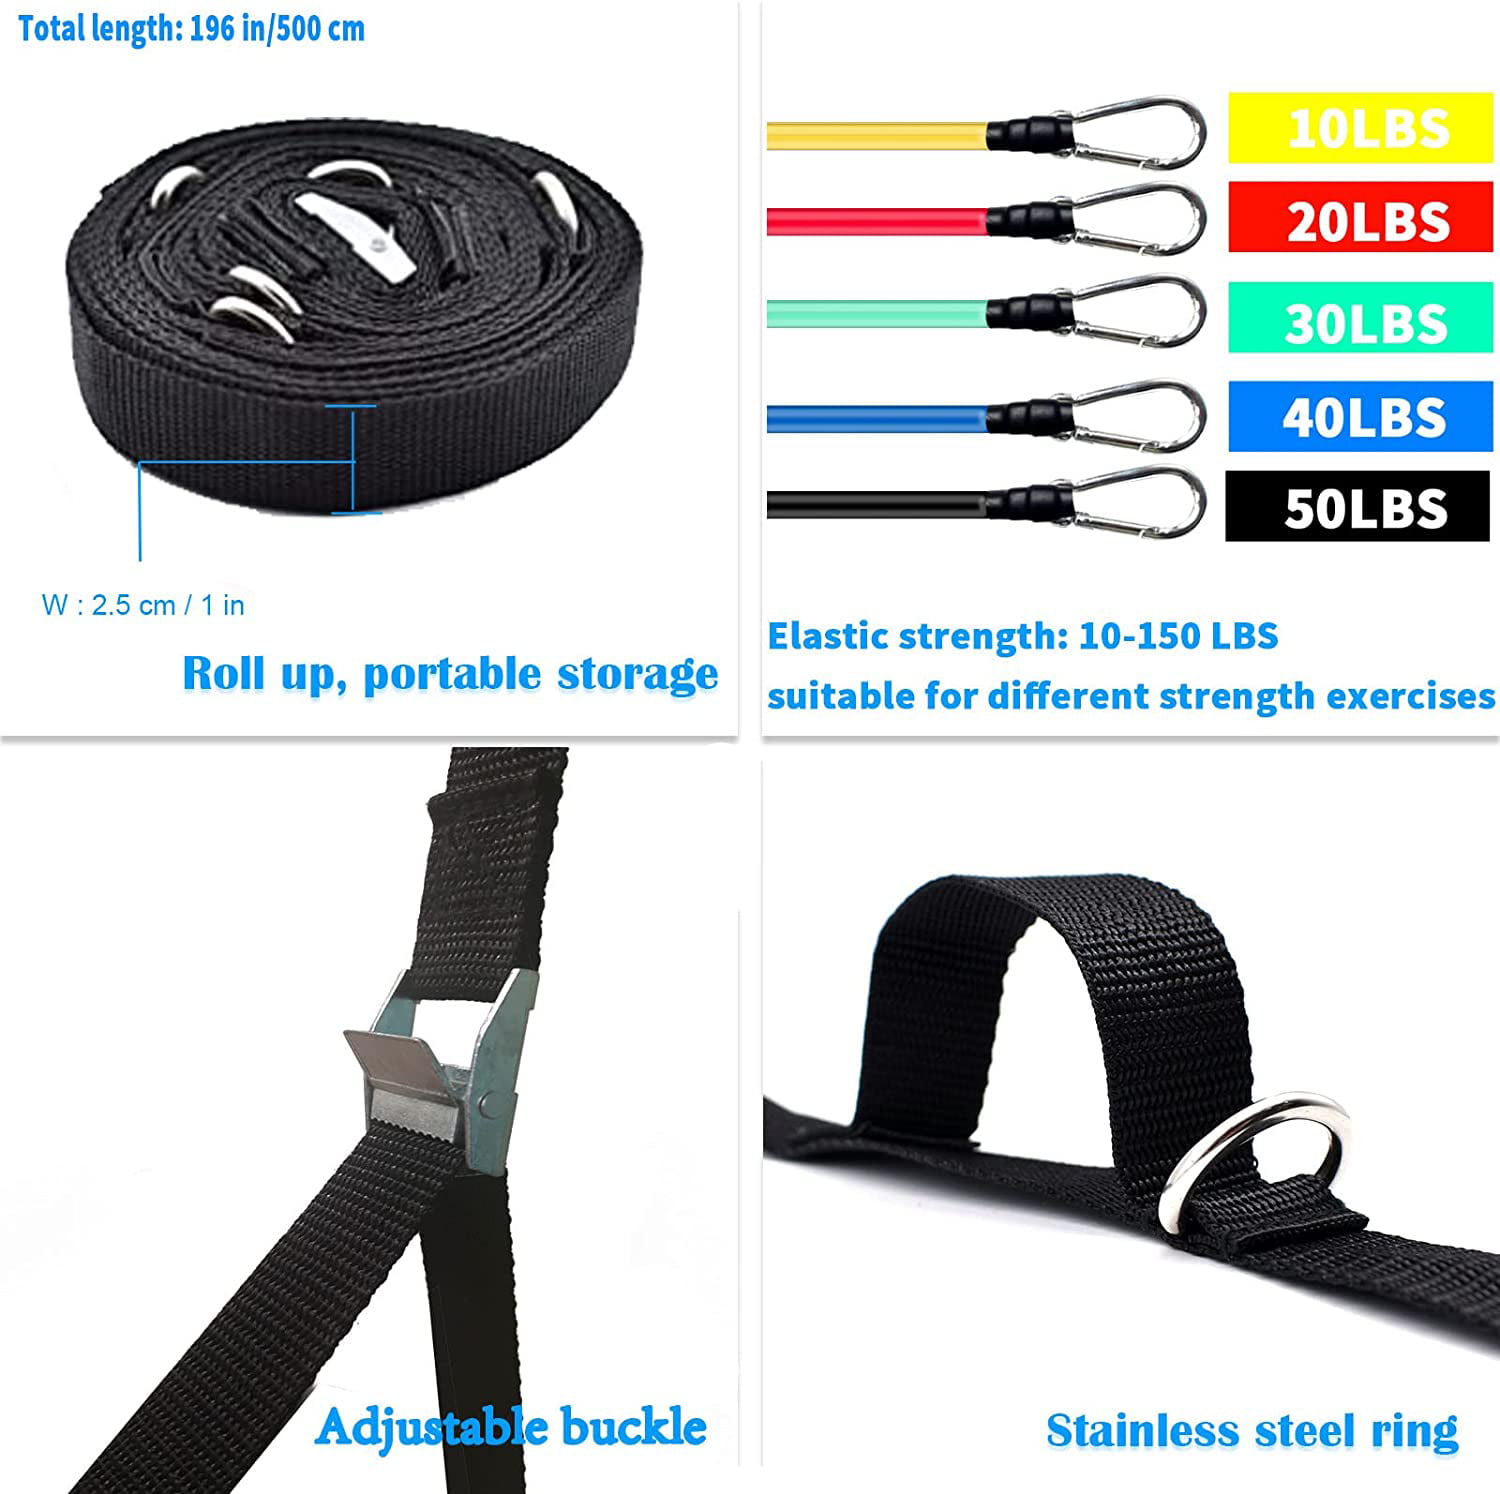 Nail-Free Multi Point Anchor Gym Attachment for Home Fitness Punch-Free Brebebe Door Anchor Strap for Resistance Bands Exercises Easy to Install Portable Door Band Resistance Workout Equipment 